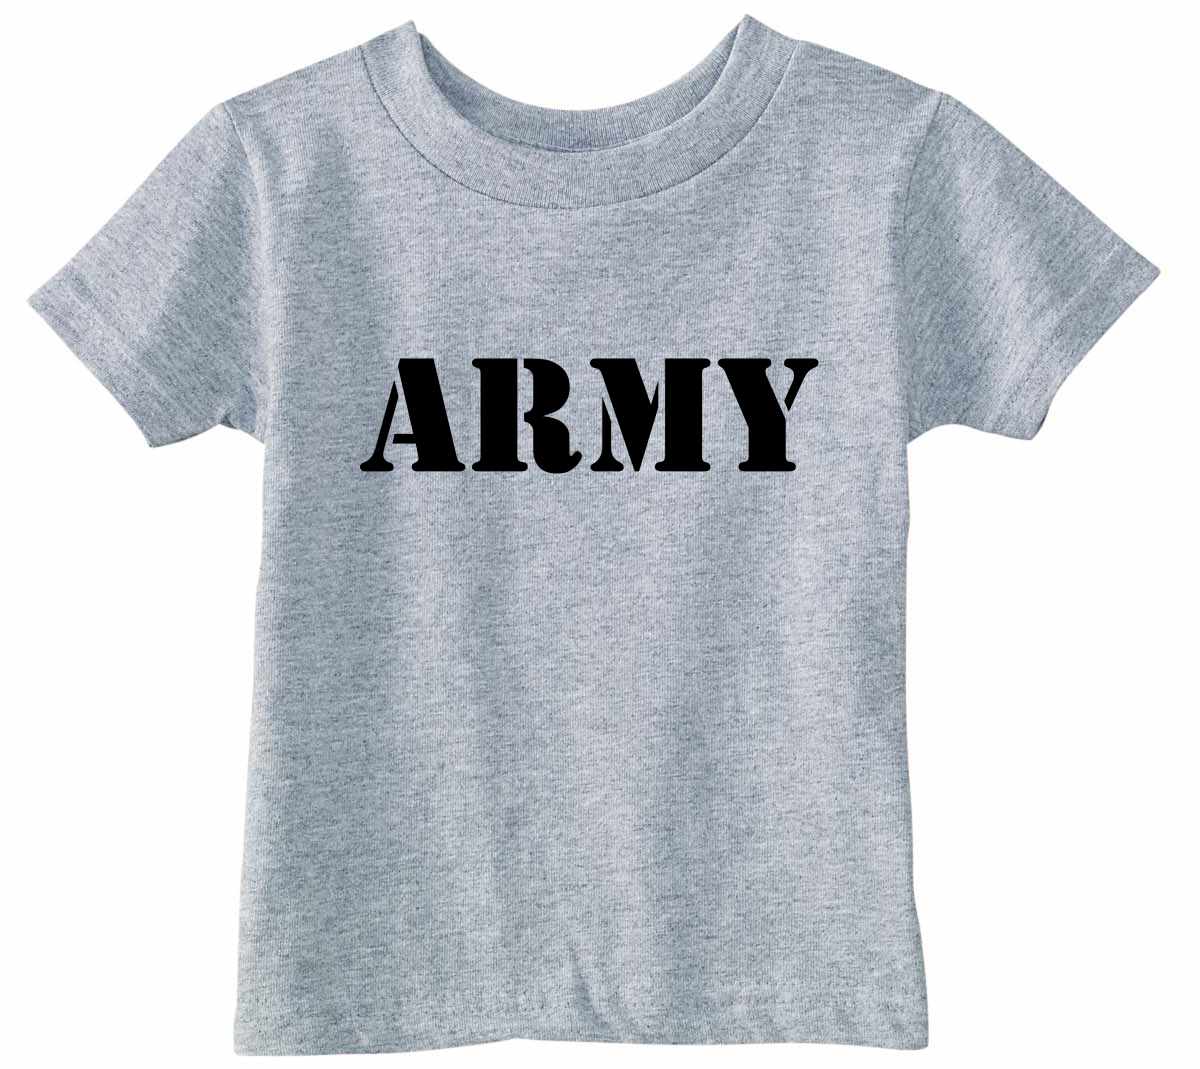 ARMY Infant/Toddler 